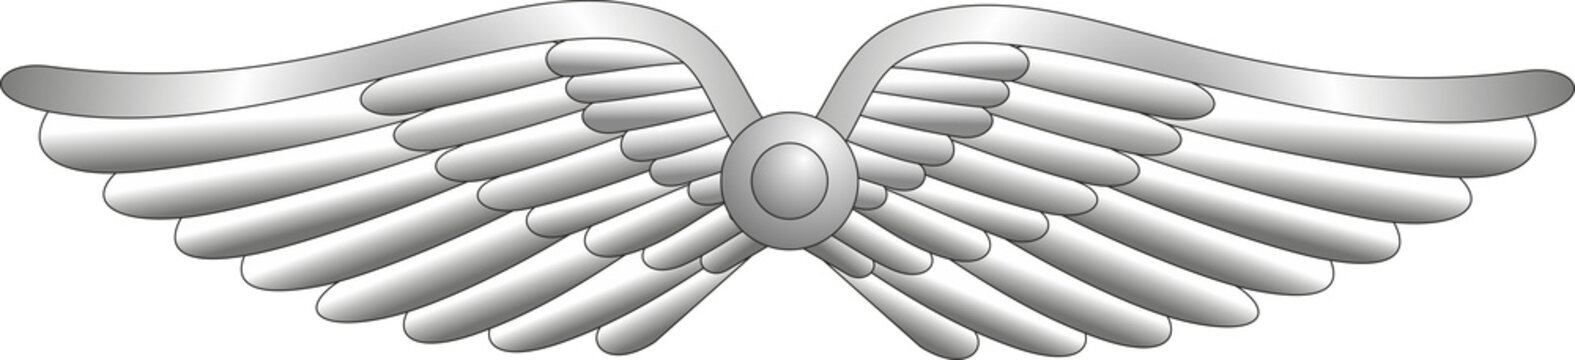 Silver metal wings, air Force insignia on a white background. Vector image.